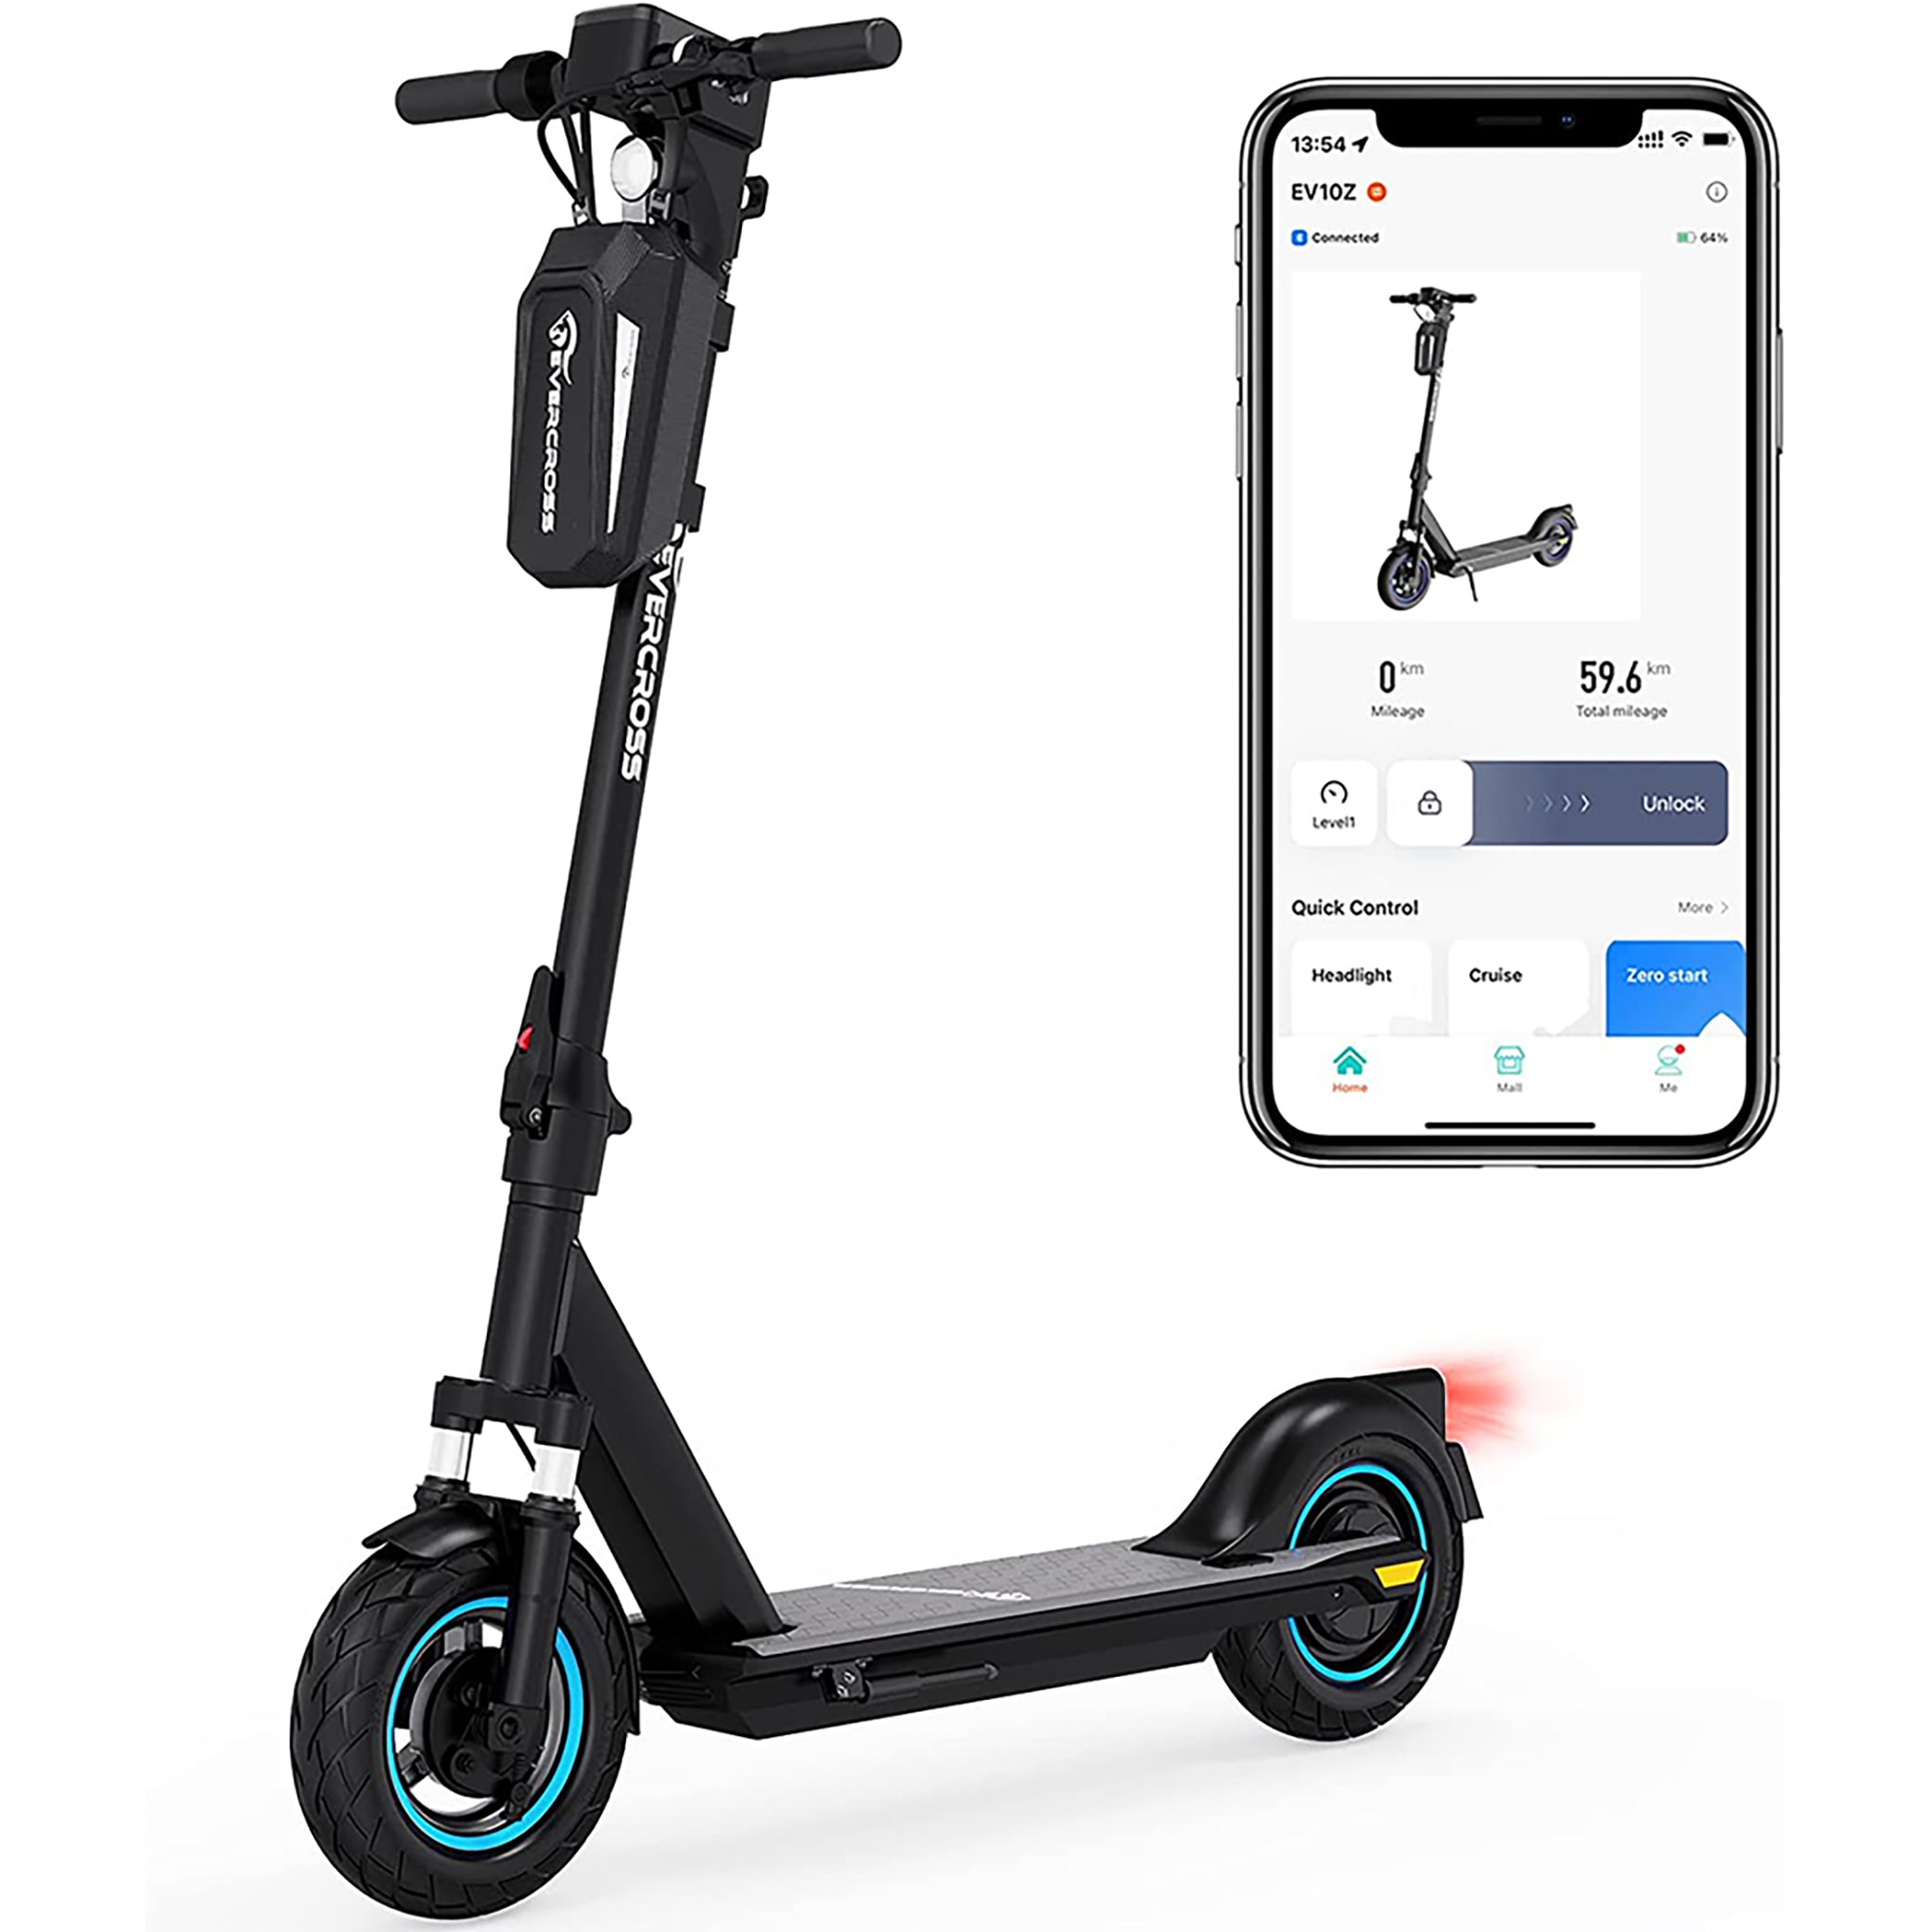 EVERCROSS Evercross Ev10z App-enabled Electric Scooter, 22-Mile and 19-MPH  with 500w Peak Power at